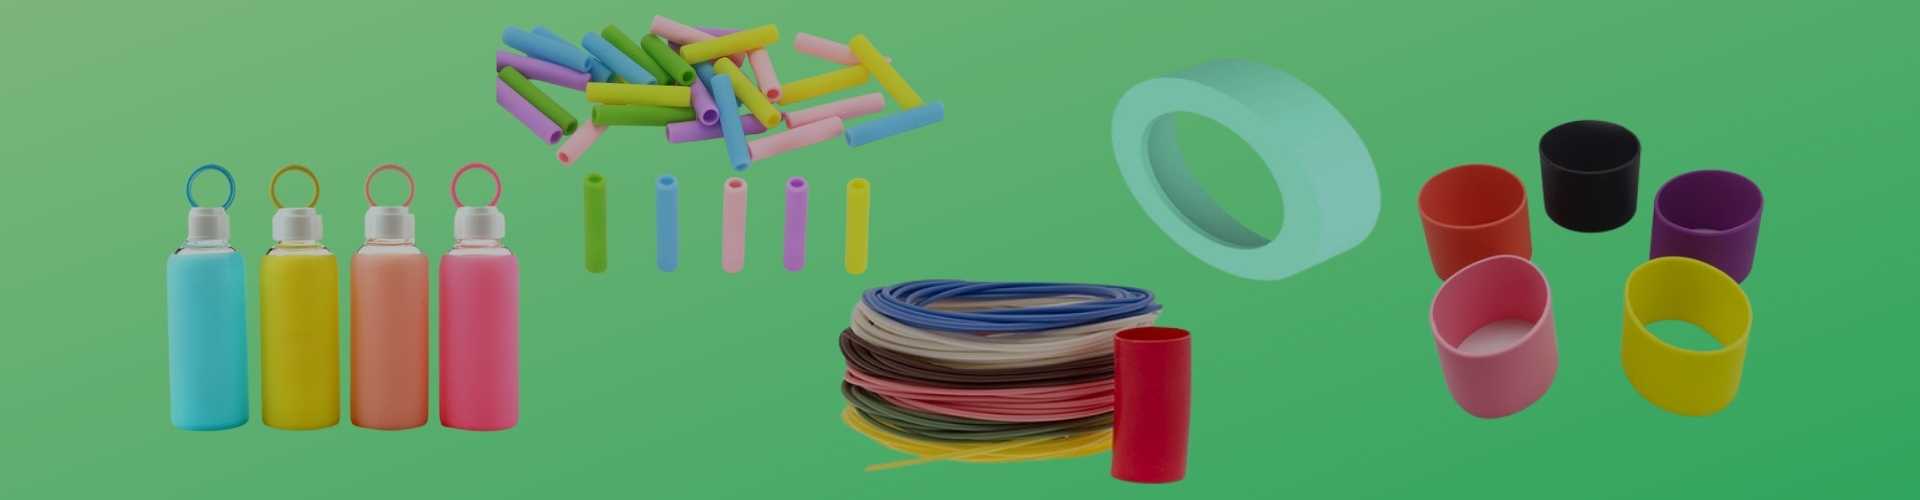 Silicone Sleeve Manufacturer